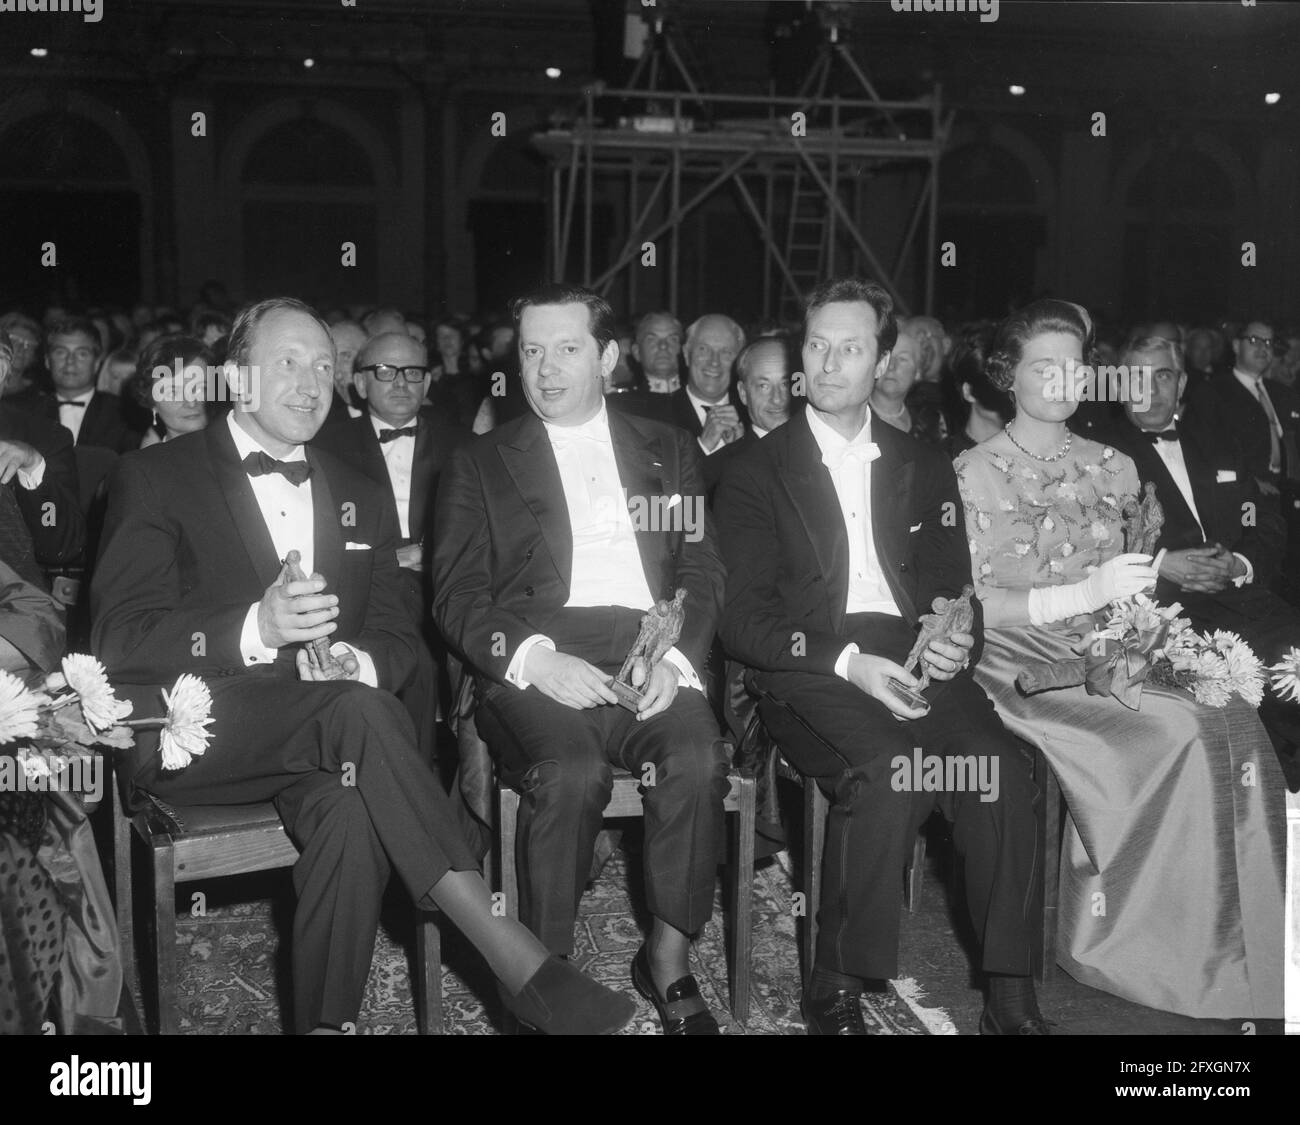 Four Edison winners; from left to right violinists Herman Krebbers and Arthur Grumiaux, conductor Carlo Maria Giulini and Mrs. Soames (daughter of Winston Churchill), October 29, 1965, classical music, musicians, awards, award ceremonies, The Netherlands, 20th century press agency photo, news to remember, documentary, historic photography 1945-1990, visual stories, human history of the Twentieth Century, capturing moments in time Stock Photo